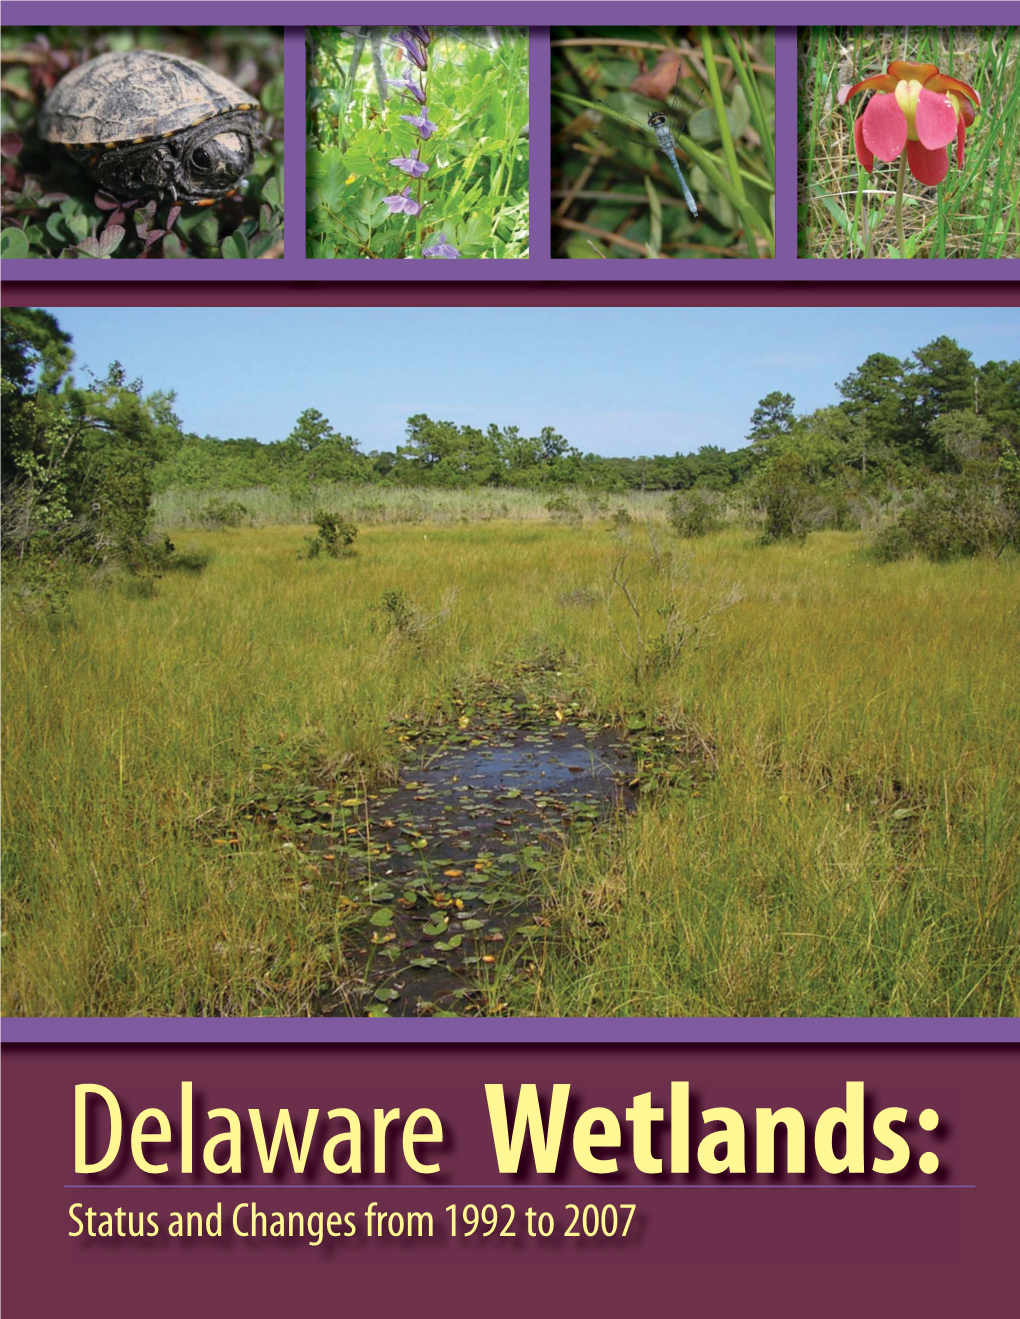 Delaware Wetlands: Status and Changes from 1992 to 2007